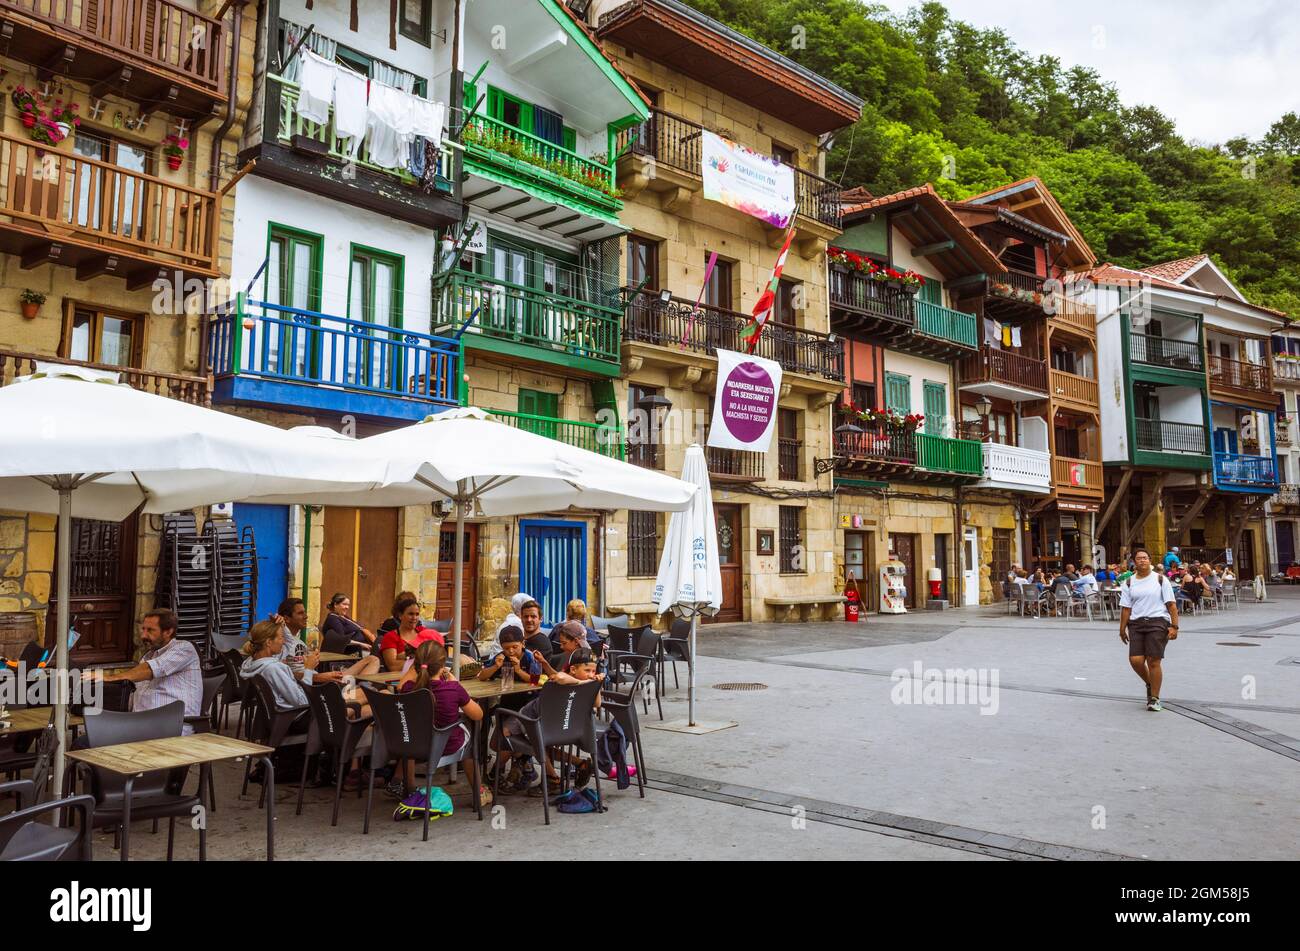 Pasajes, Gipuzkoa, Basque Country, Spain - July 17th, 2019 : Both locals and tourists sit alfresco at a tavern in the old town of Pasajes de San Juan. Stock Photo